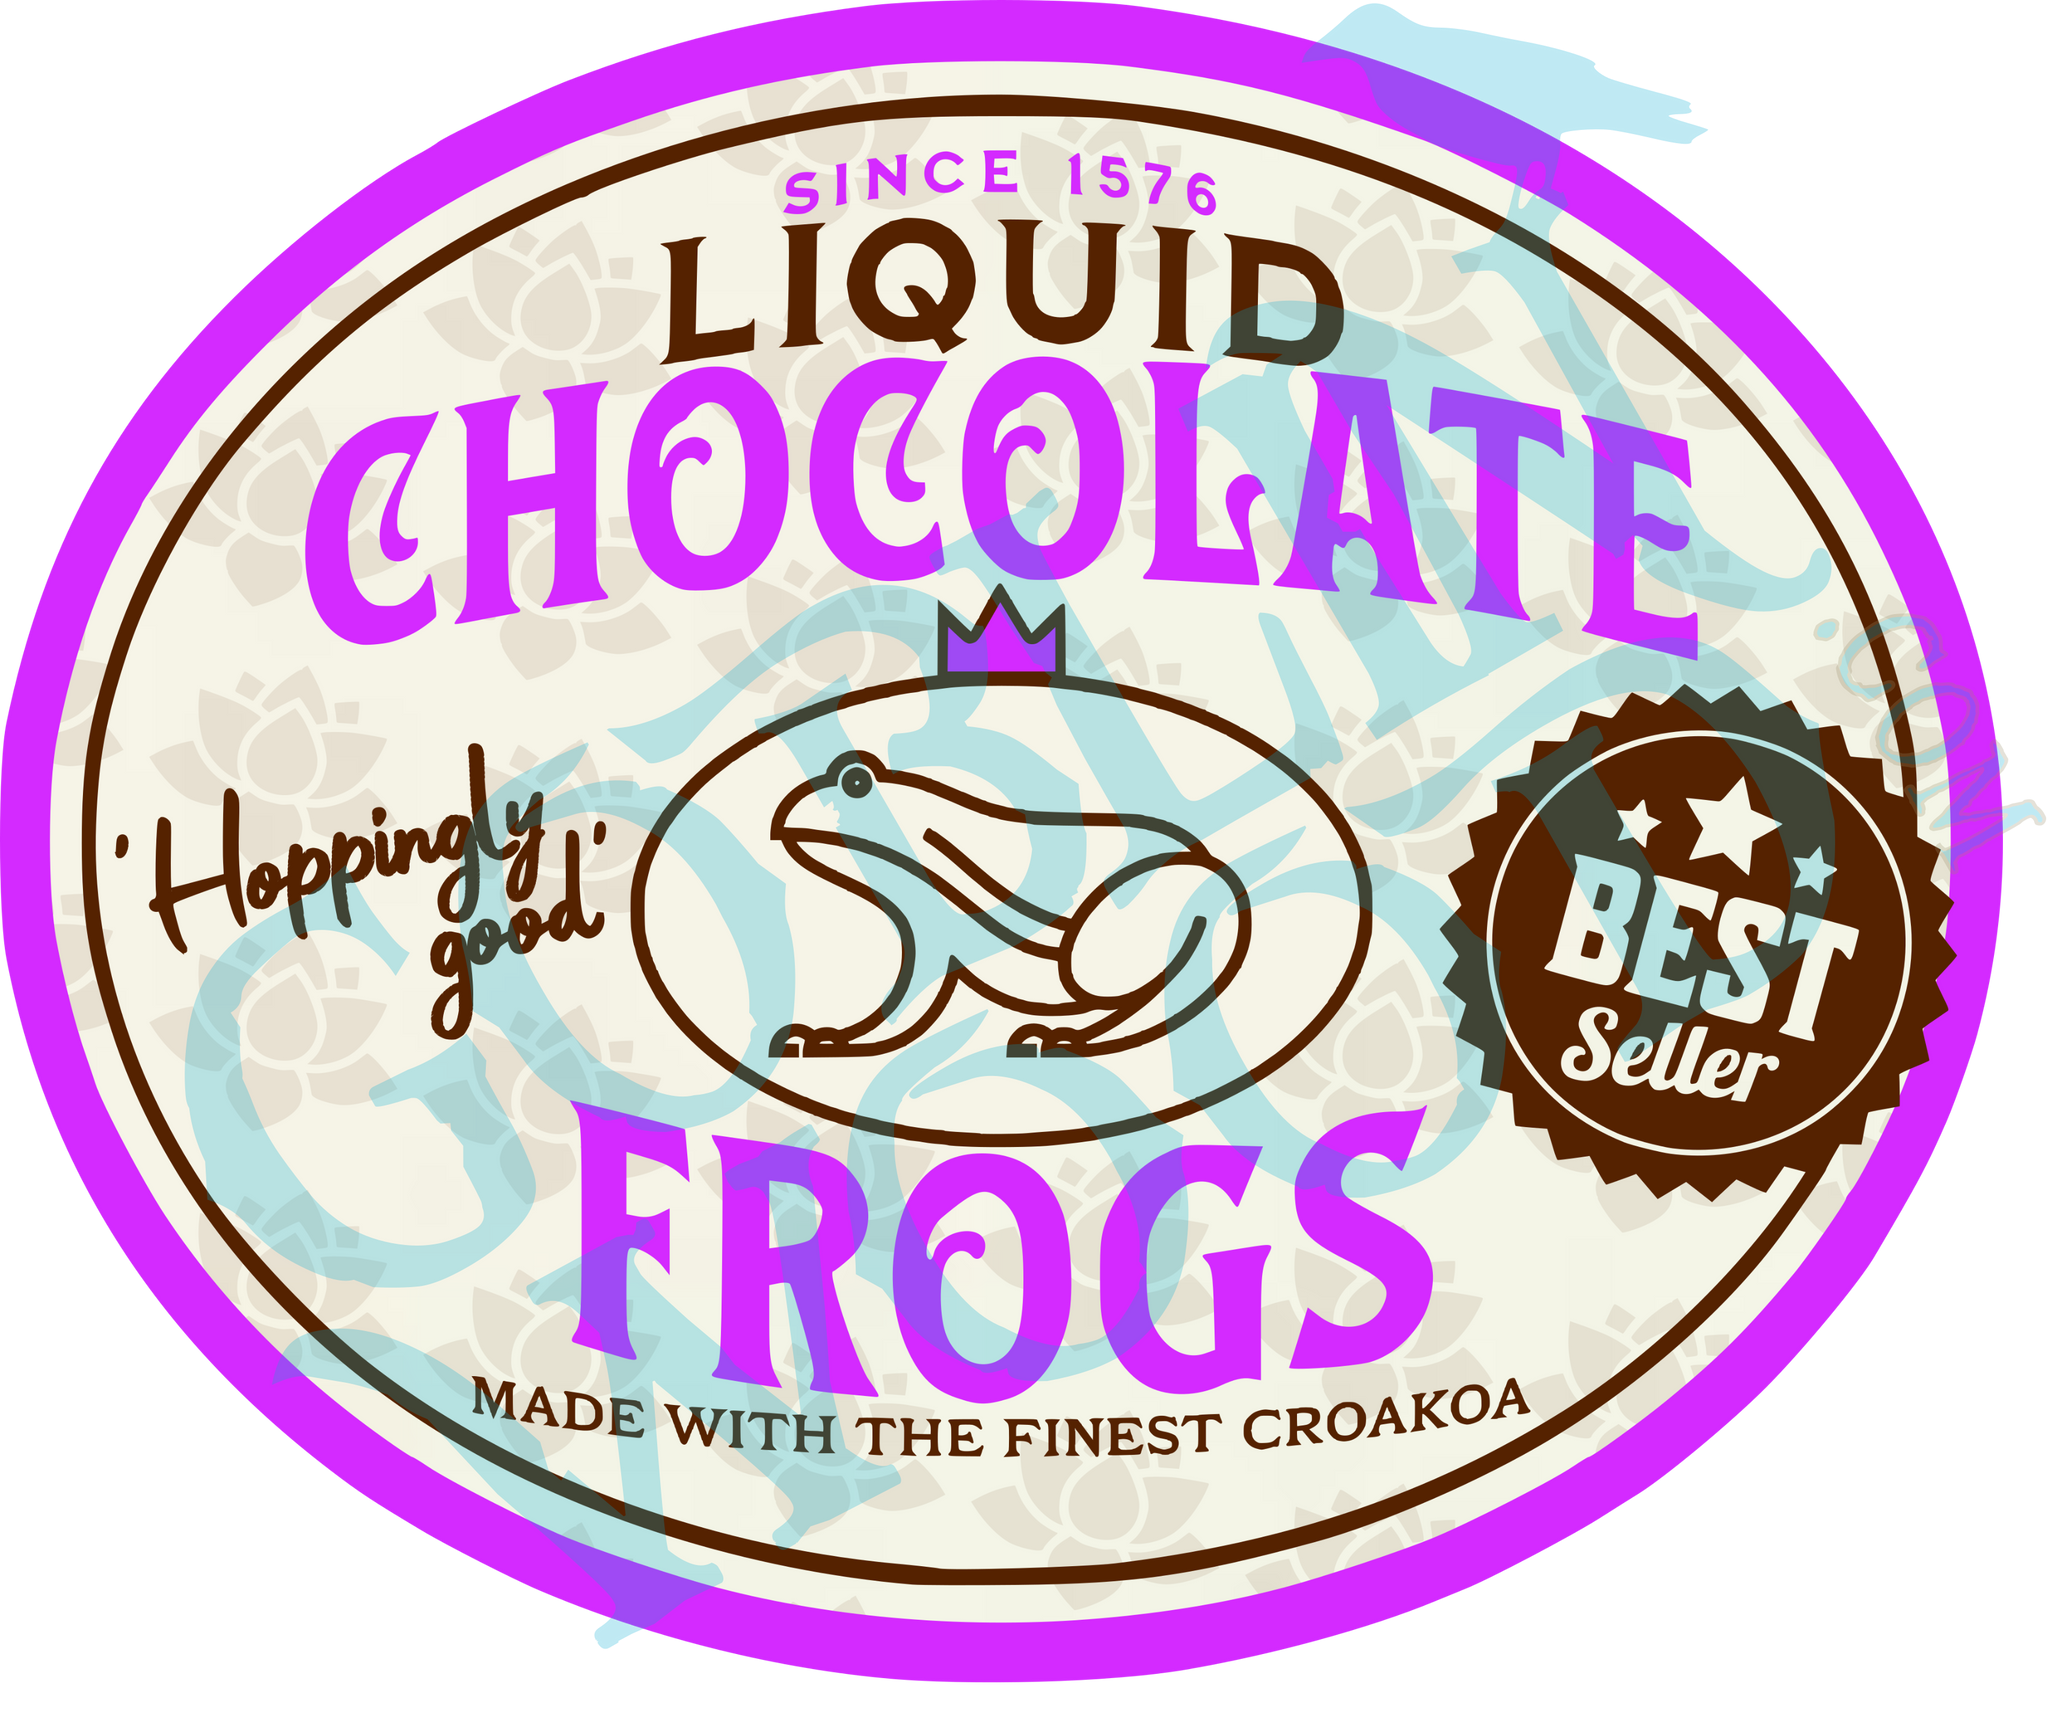 Liquid Chocolate Frogs - Harry Potter Inspired